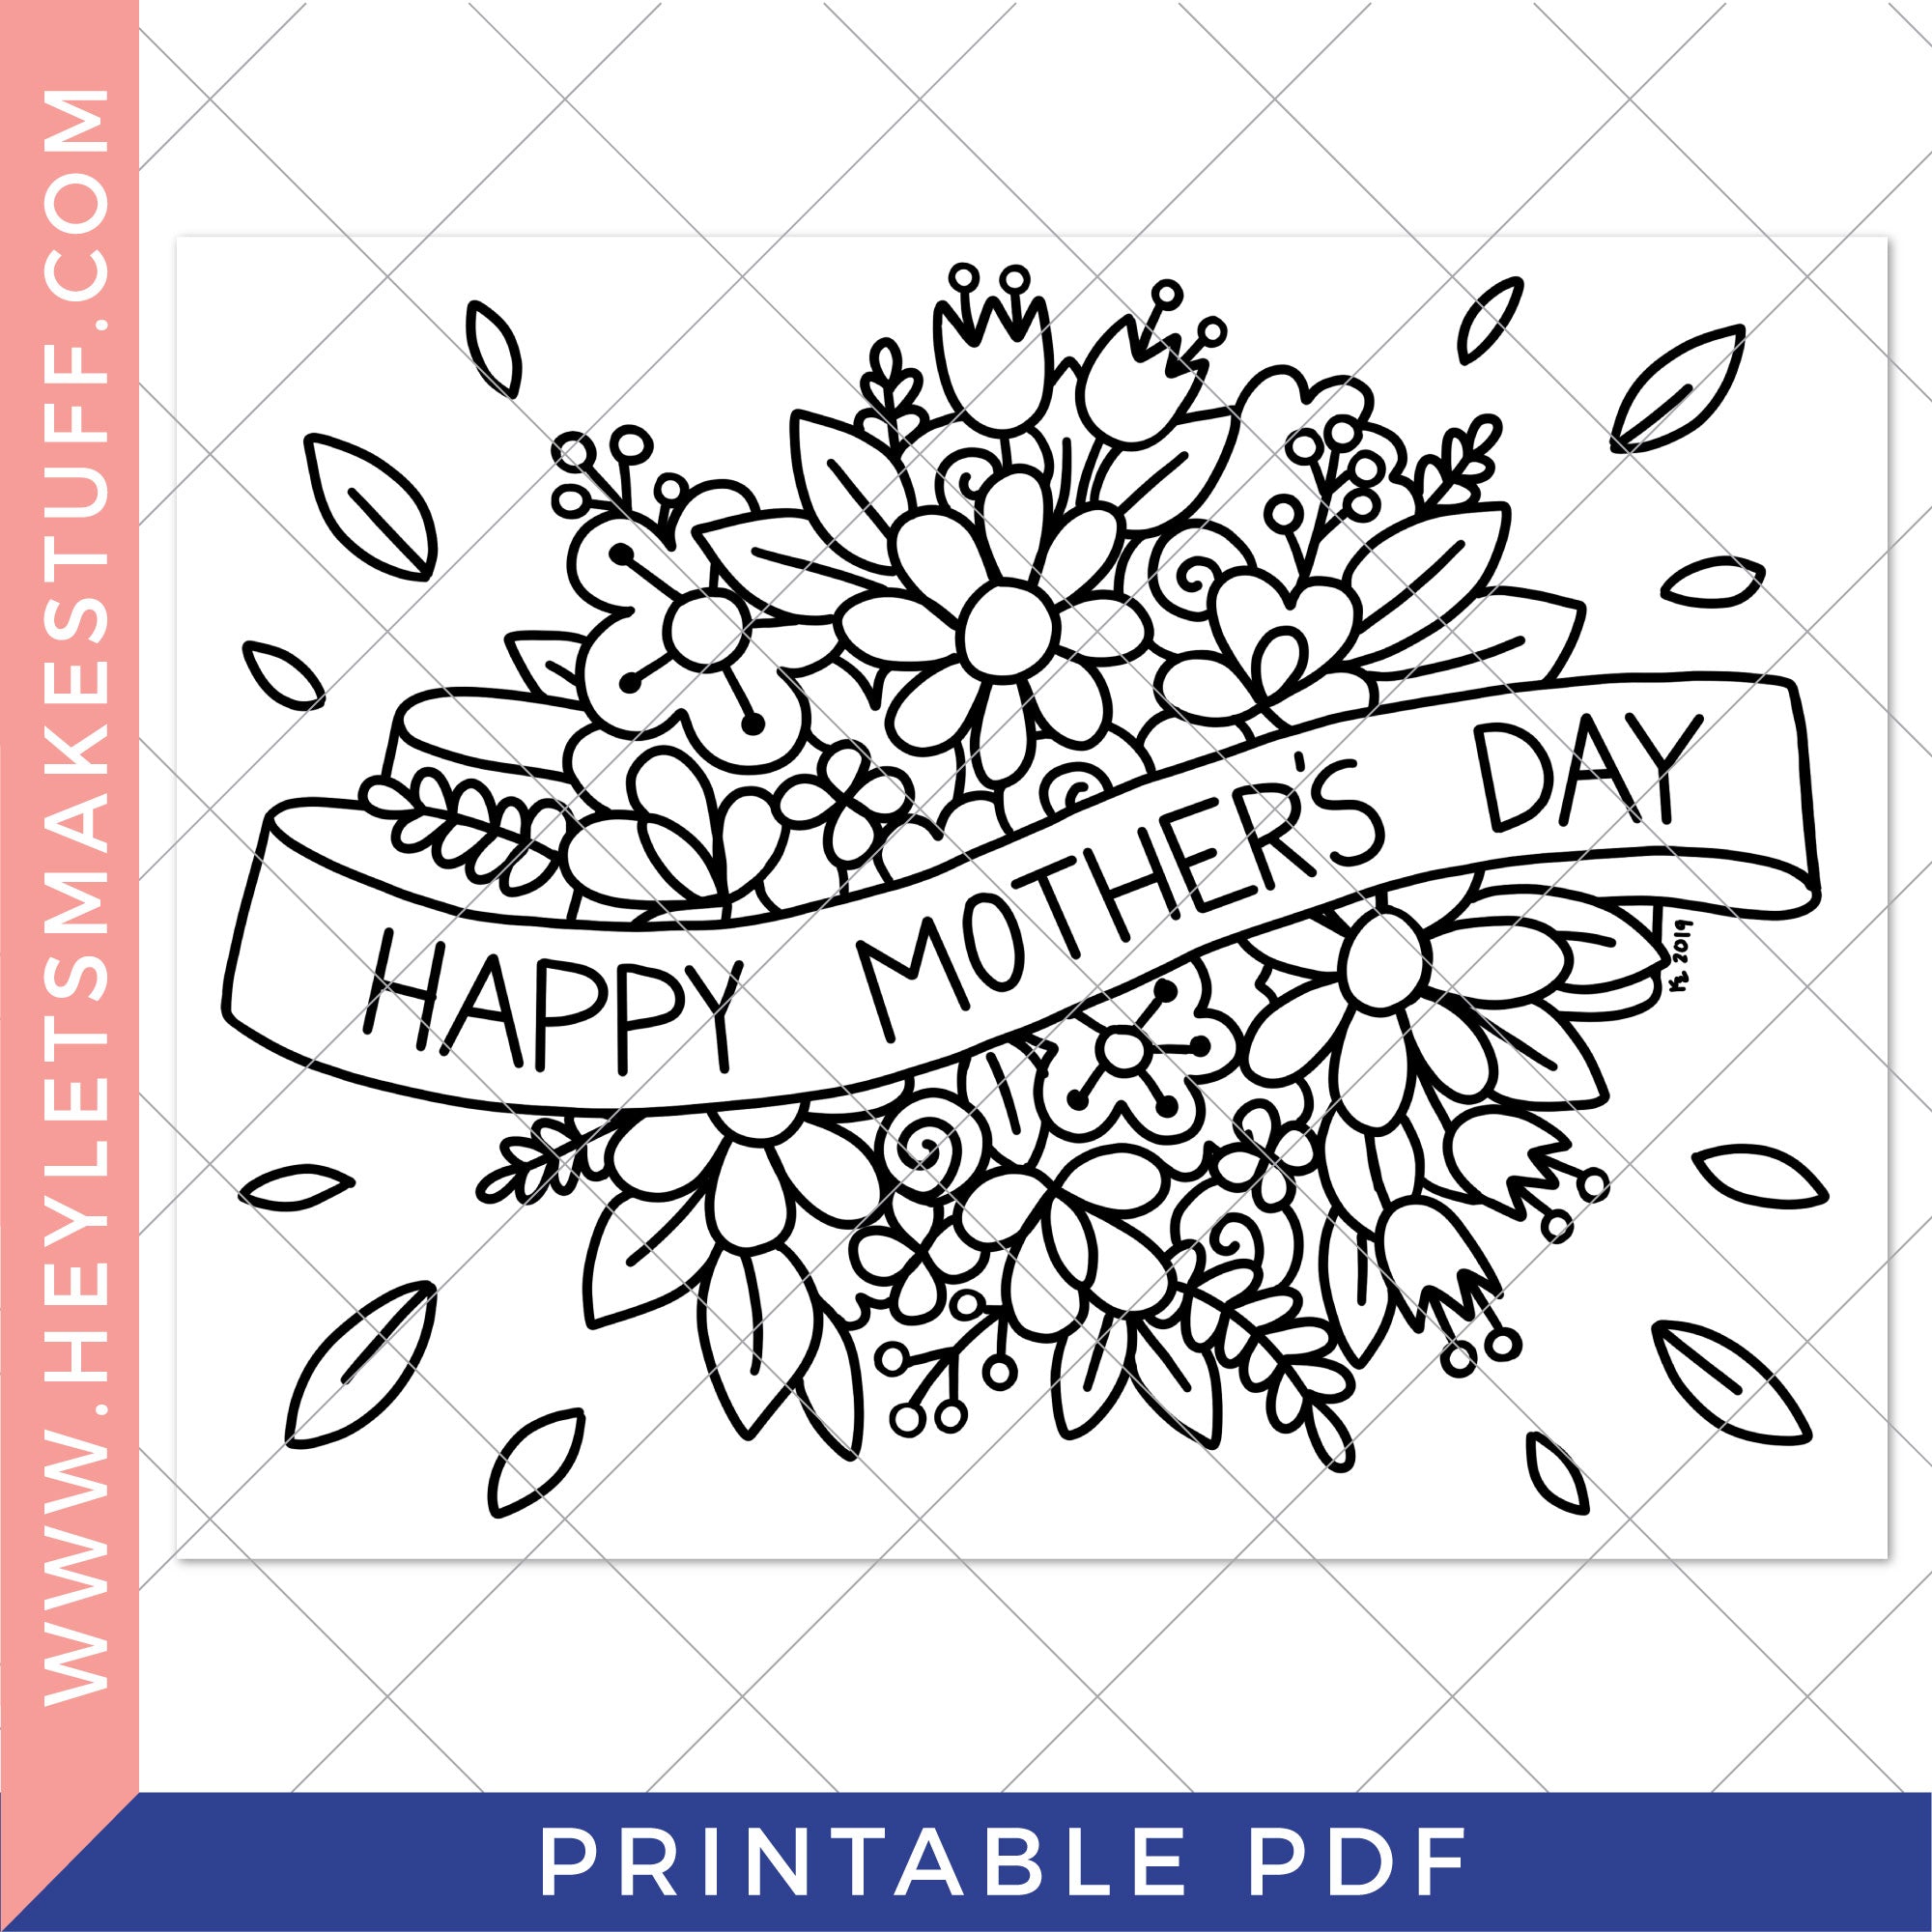 Printable mothers day coloring page â hey lets make stuff